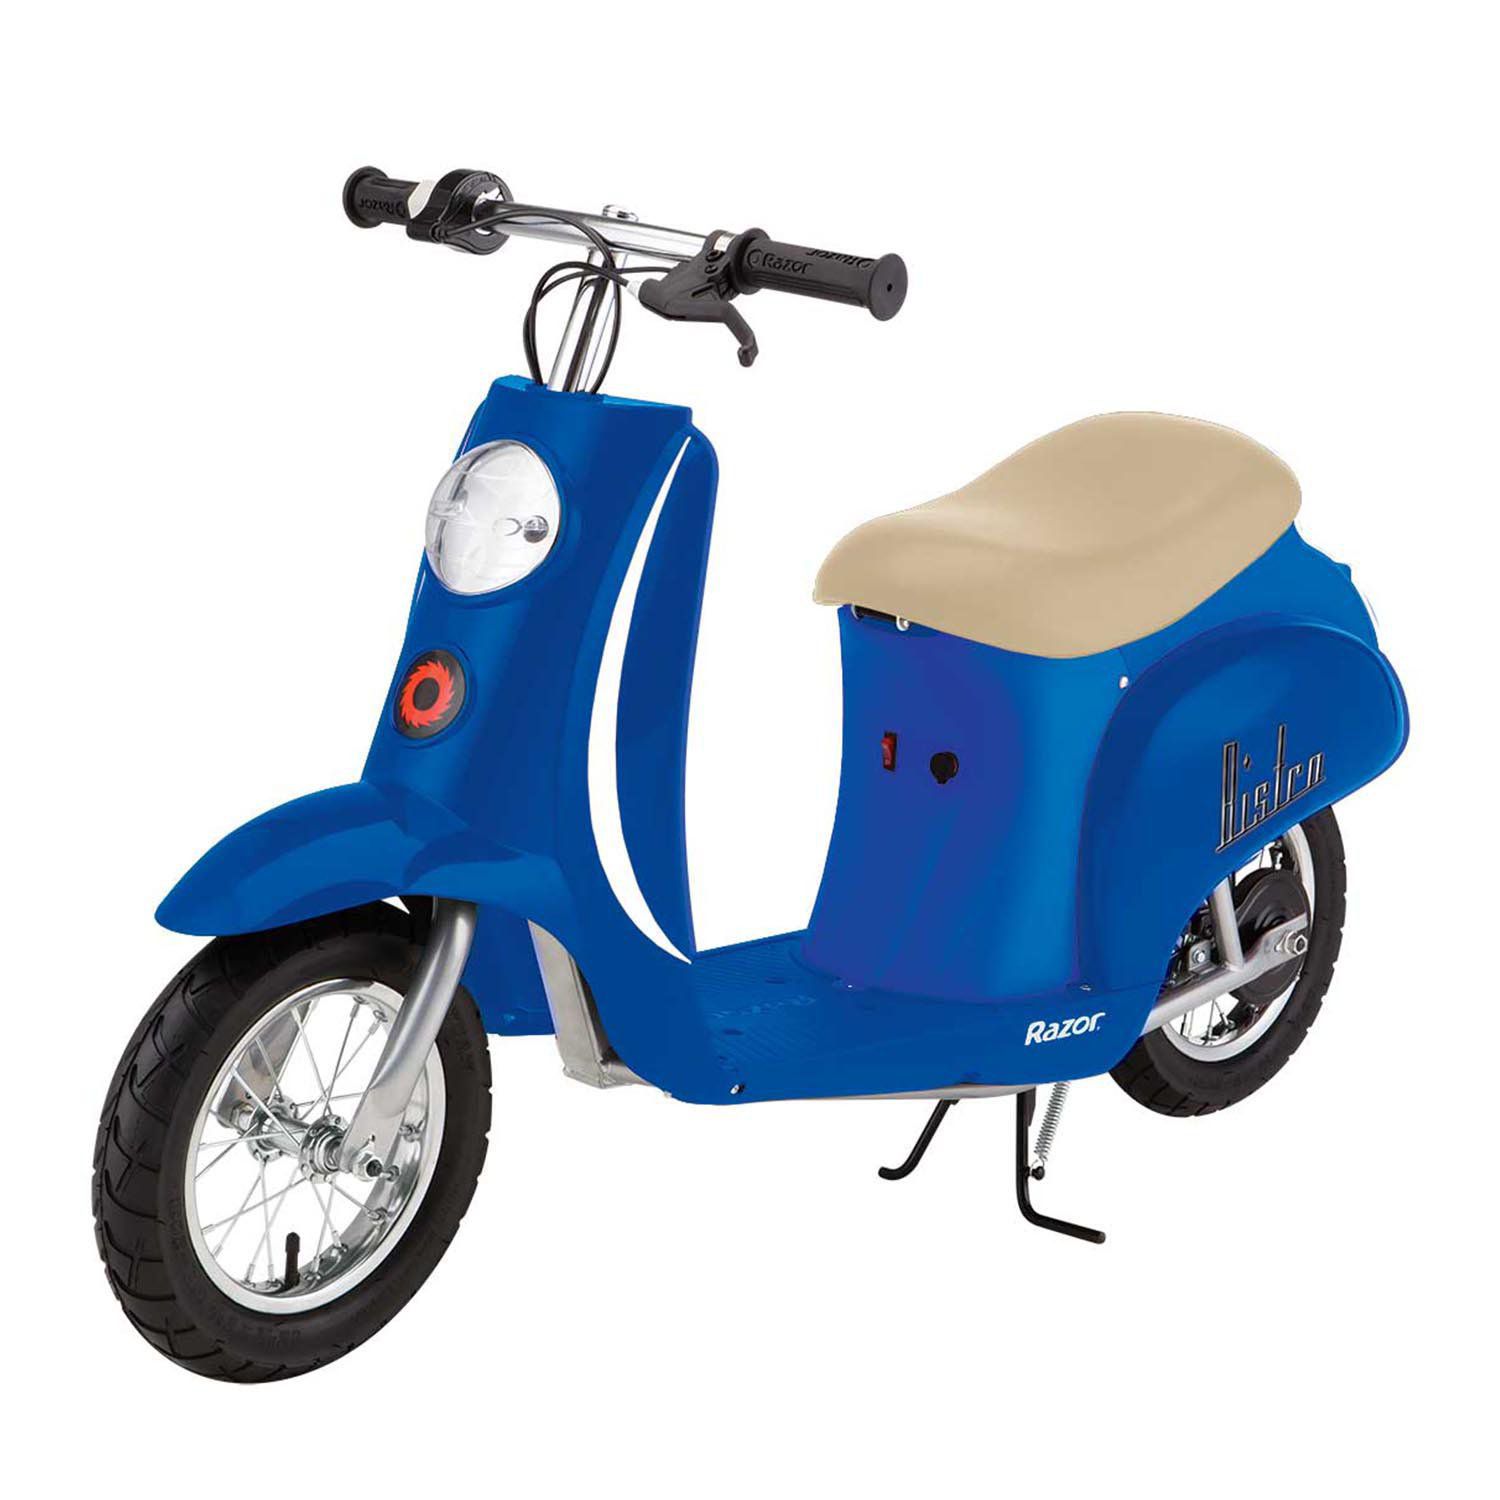 Girls Pink Official Piaggio Vespa Retro Electric Kids Moped - Kids Electric  Cars